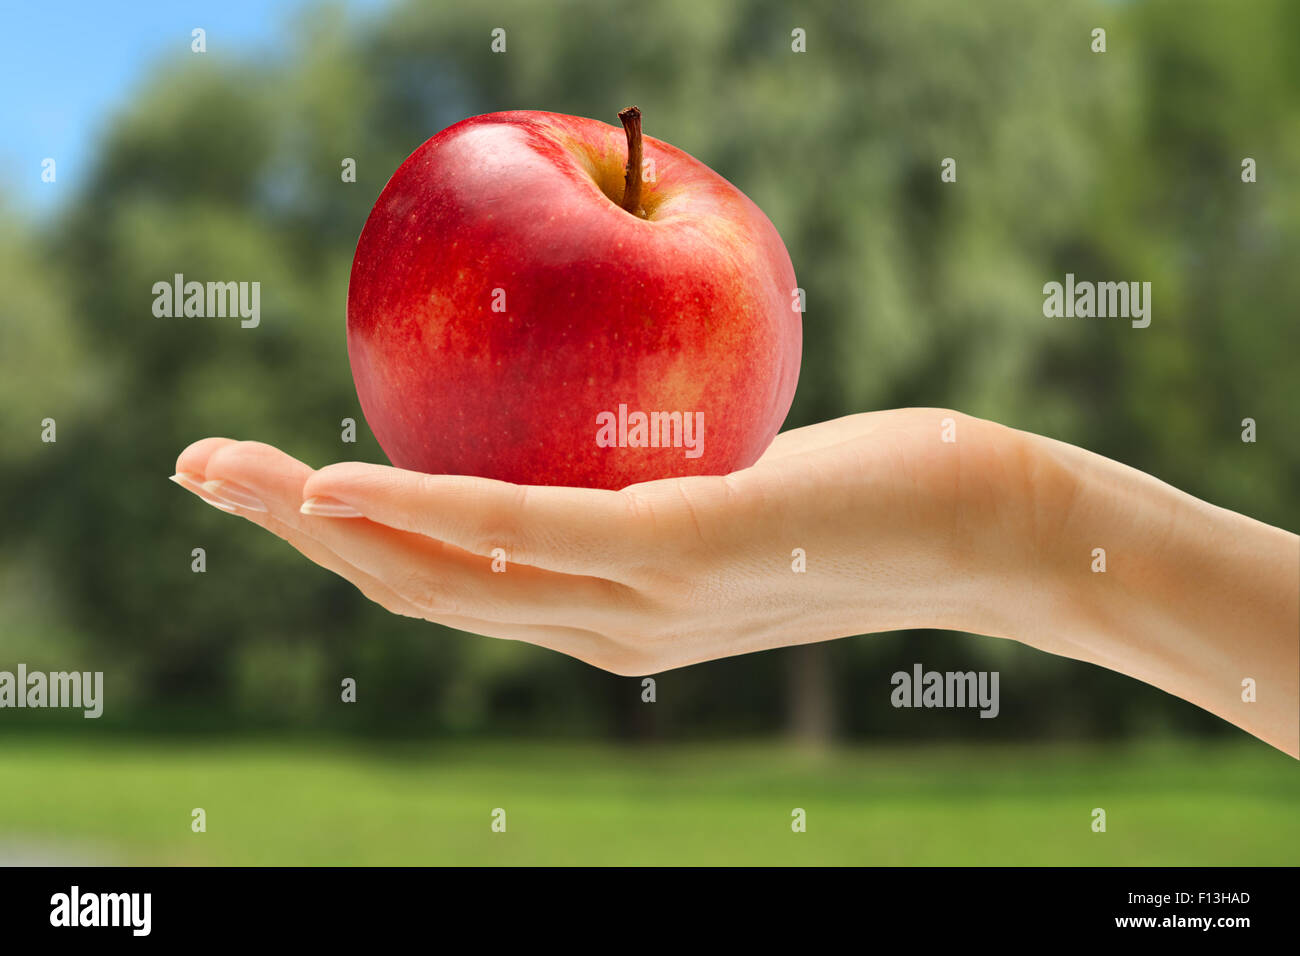 Female hand in closeup holding red apple Stock Photo